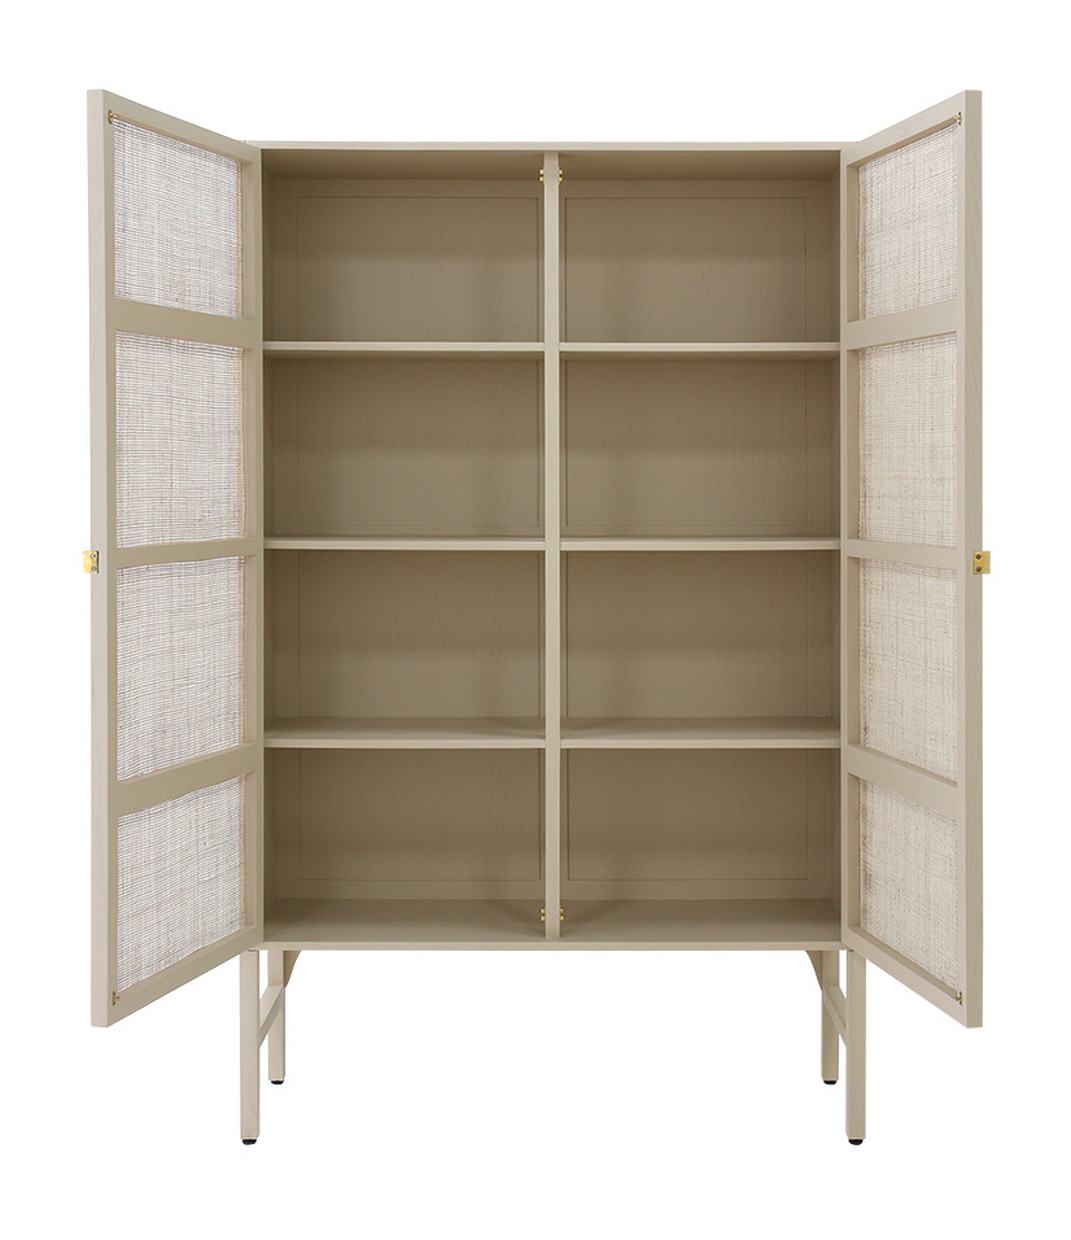 Retro webbing cabinet sand with shelves